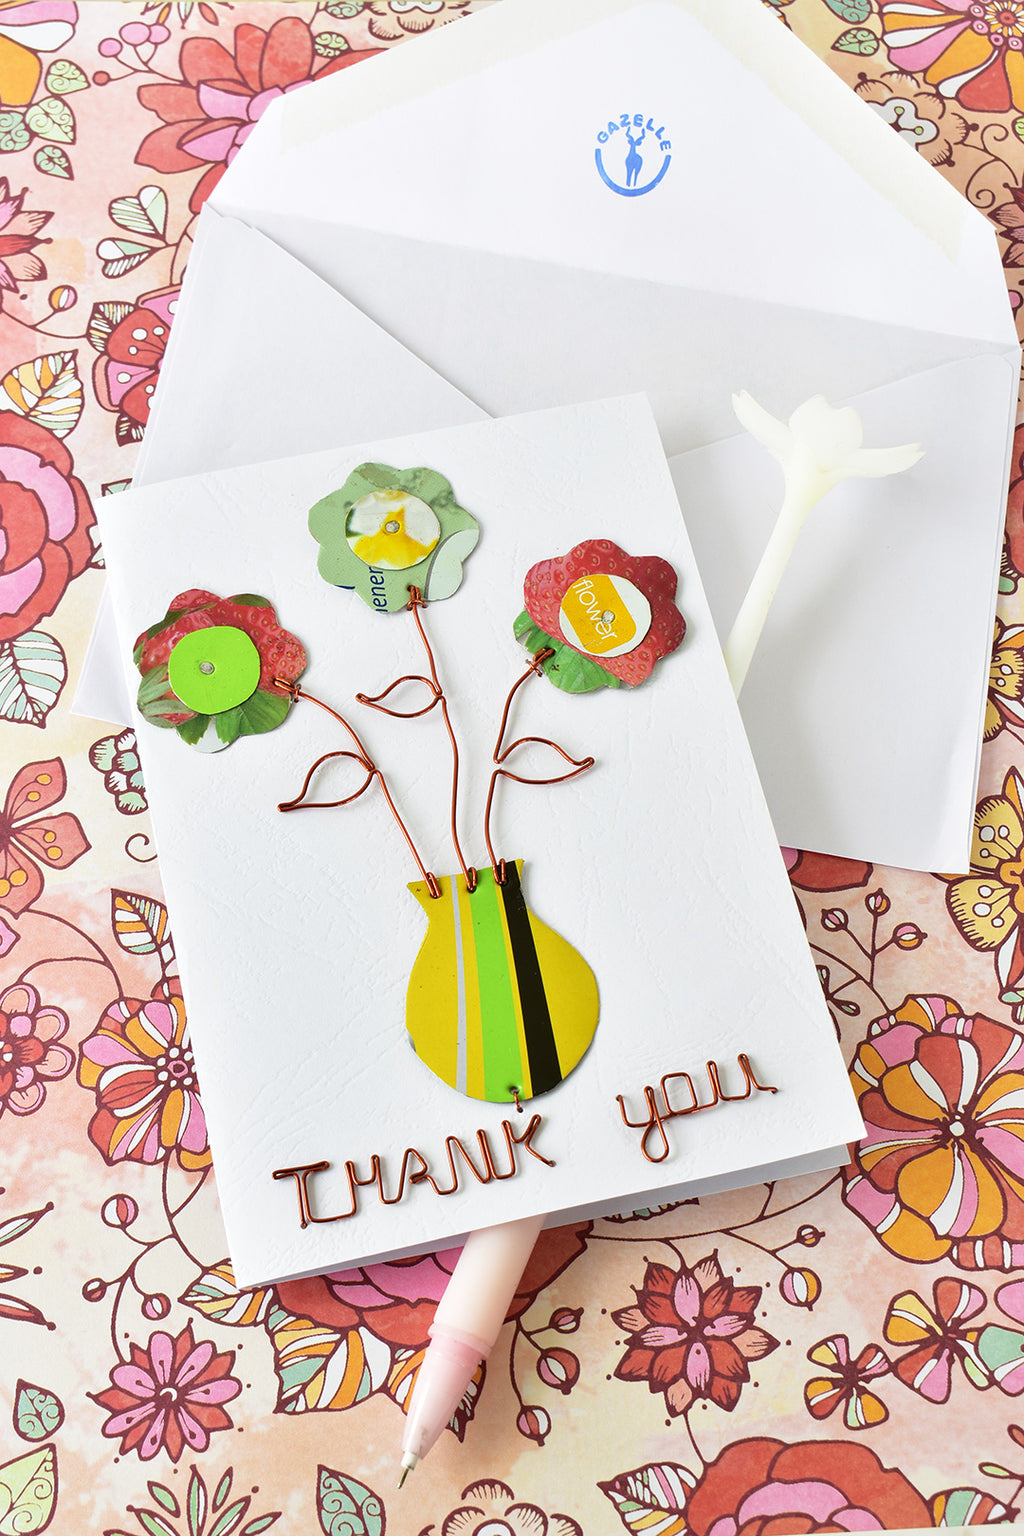 Recycled Metal Flower Vase Thank You Card